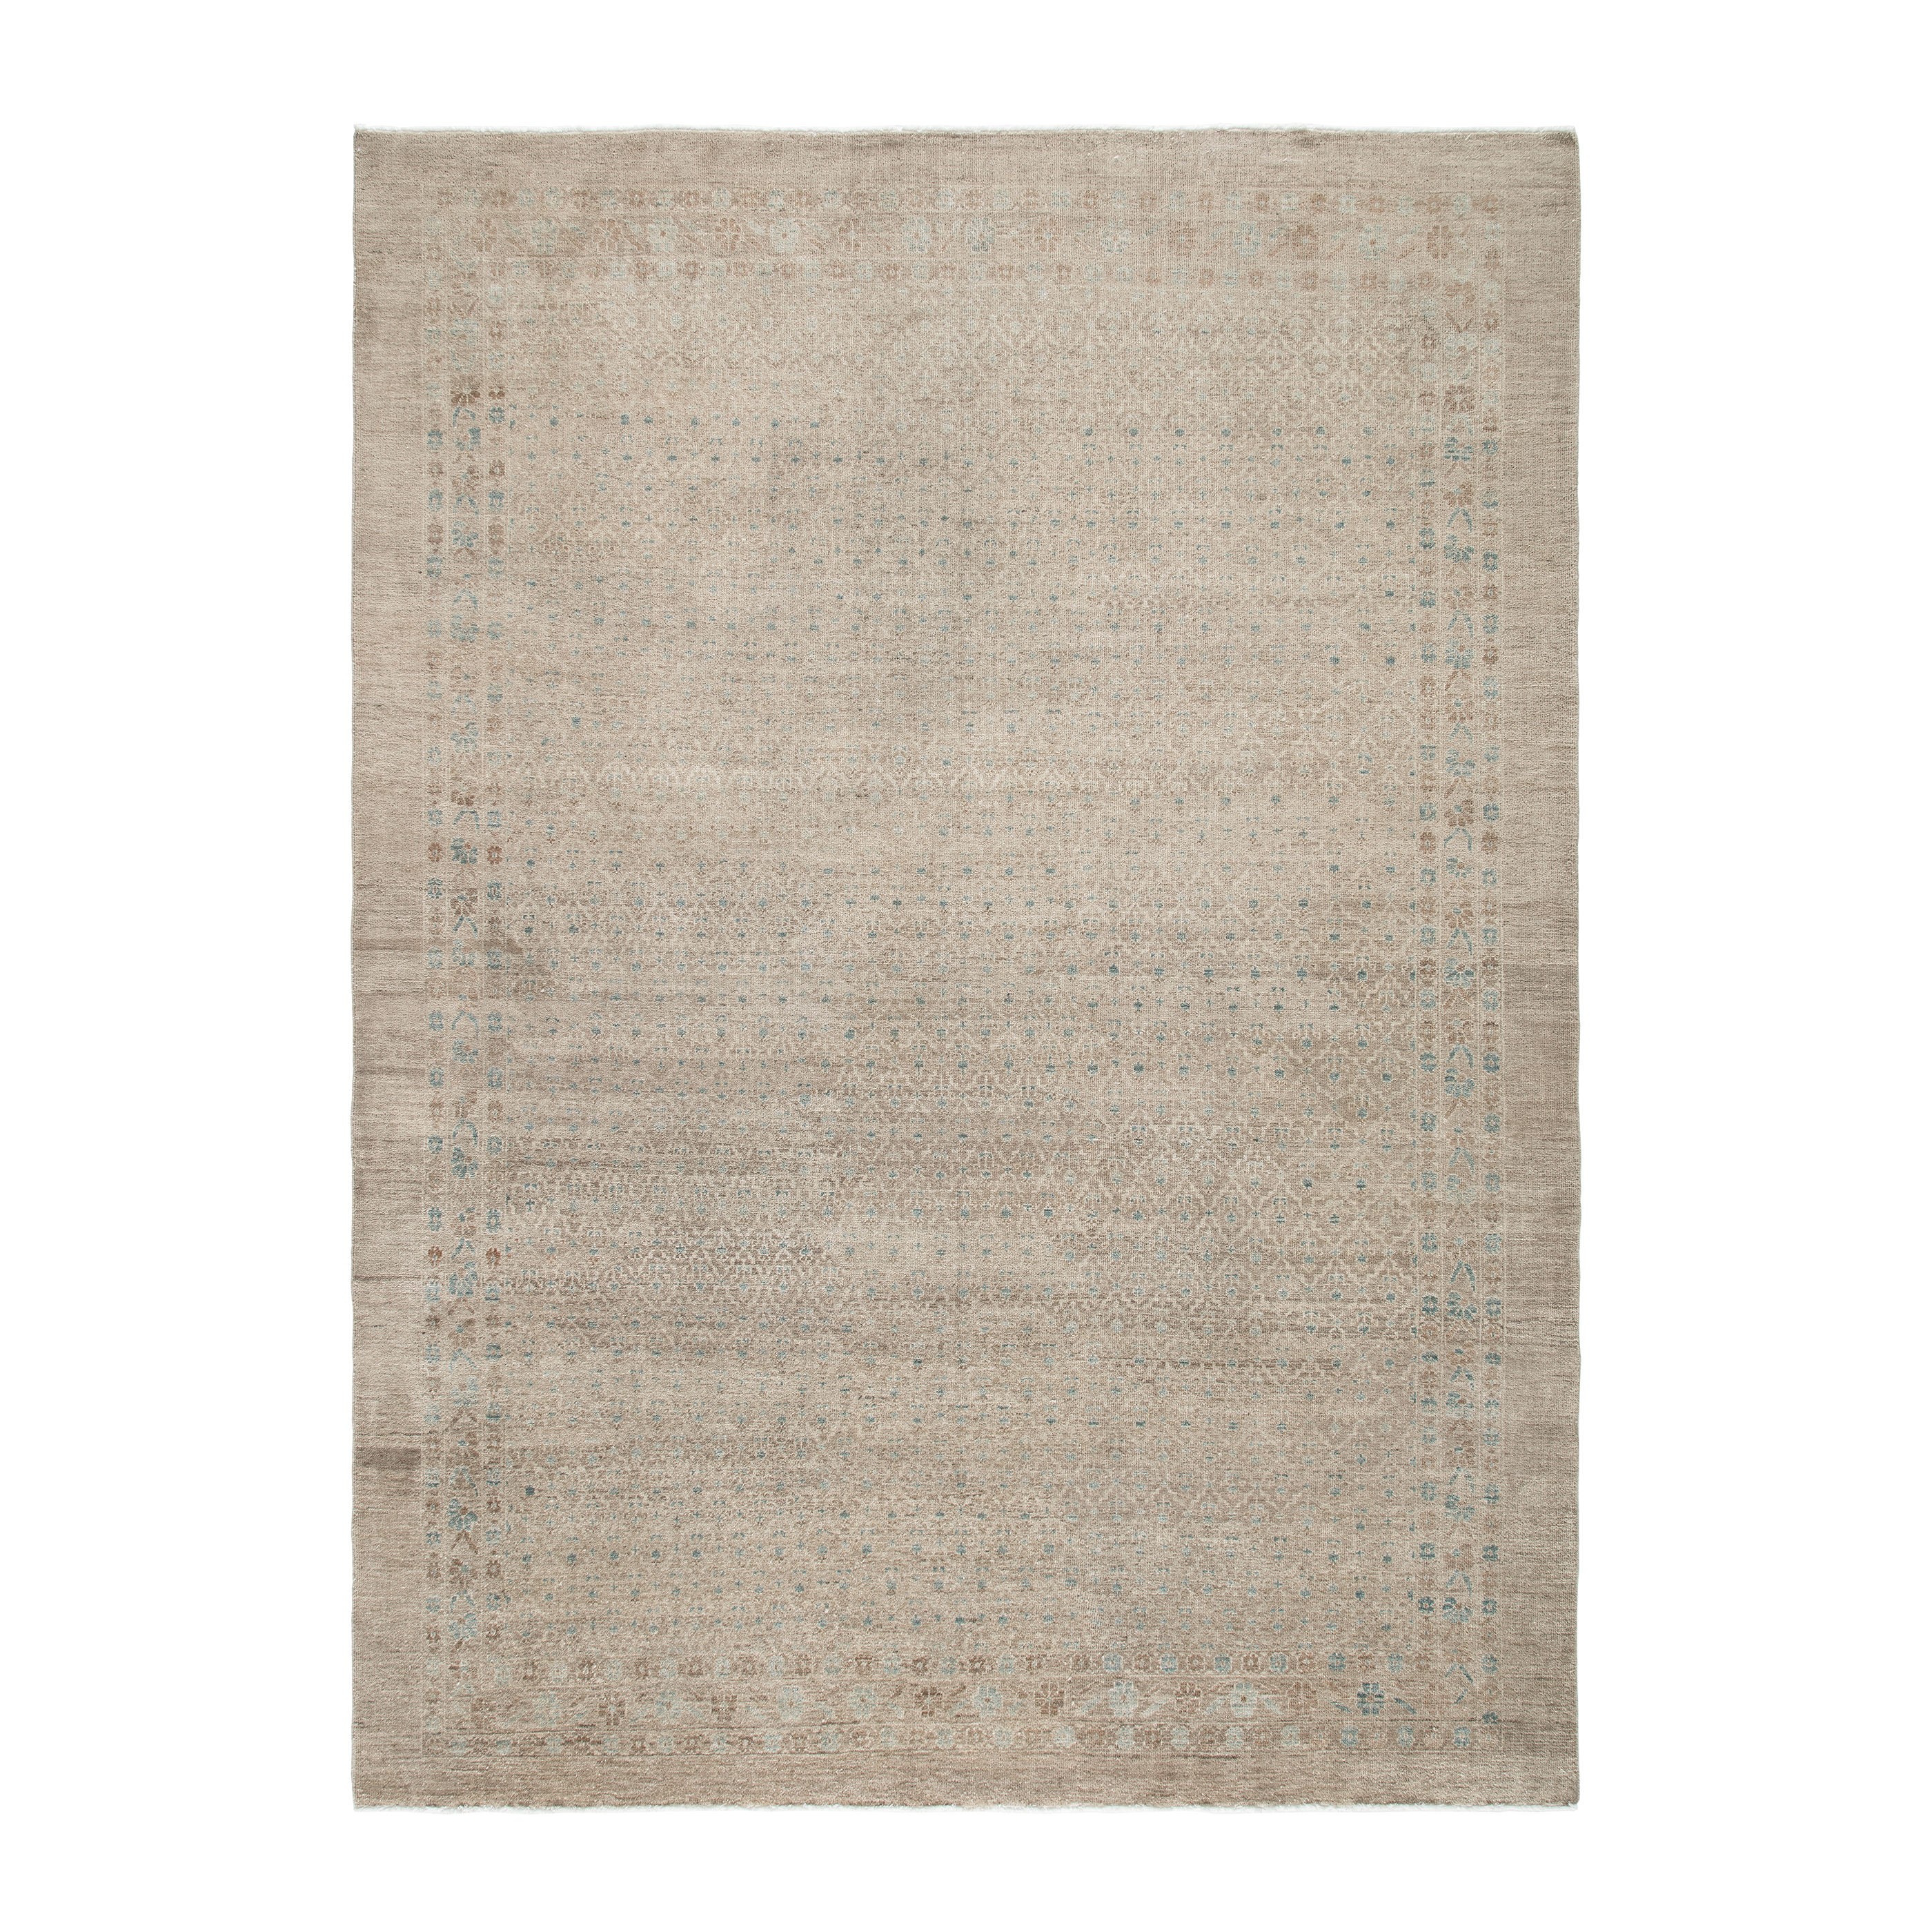 This Serab rug is crafted using hand-carded Persian wool and natural dyes in the same region as those produced centuries ago.